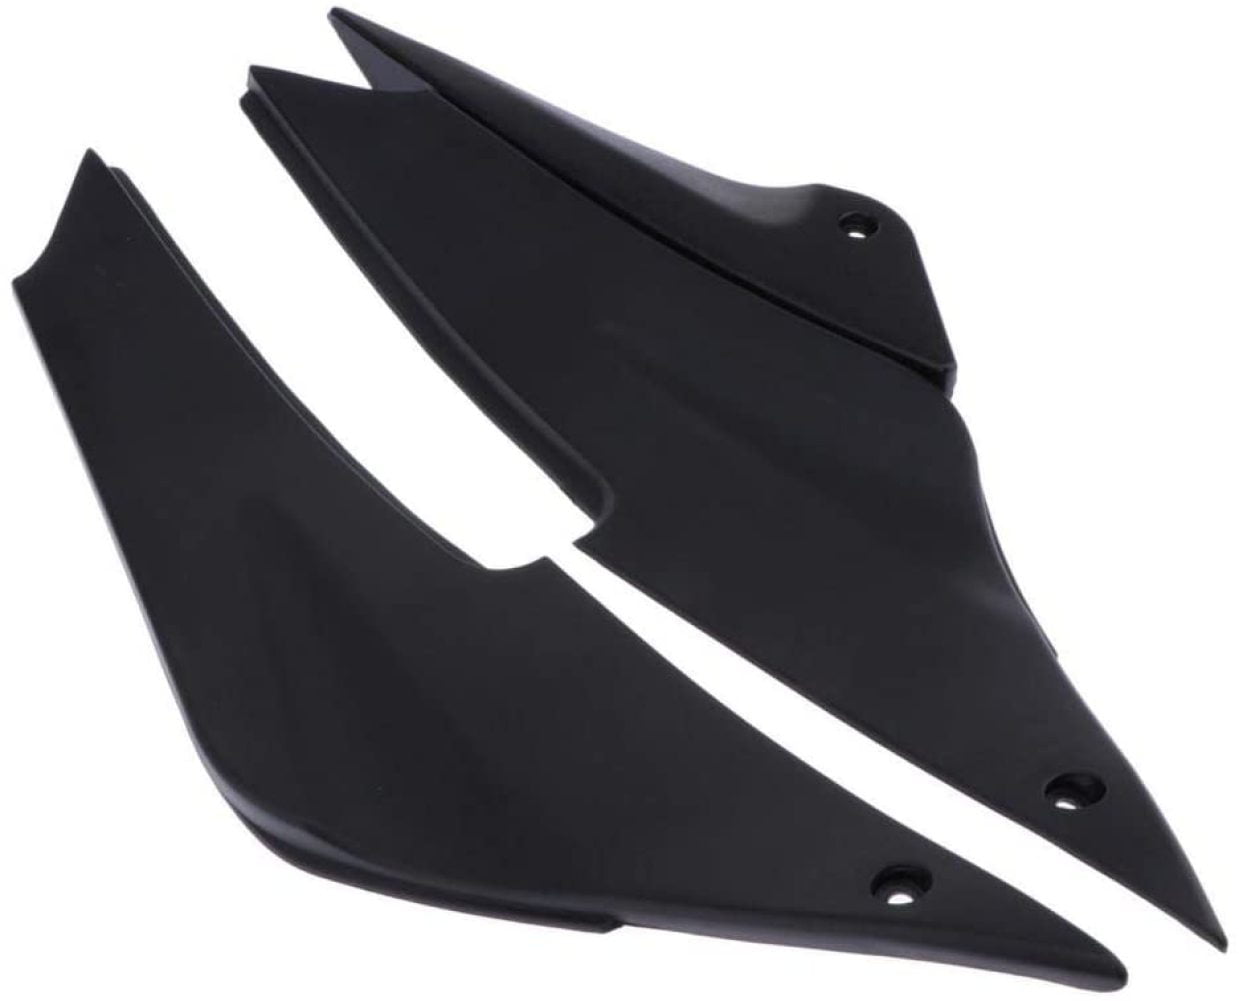 Gas Tank Side Trim Cover Panel Fairing Cowl for Kawasaki Ninja ZX6R ZX636 ZX6 05 06 Motorcycle Accessories Black 